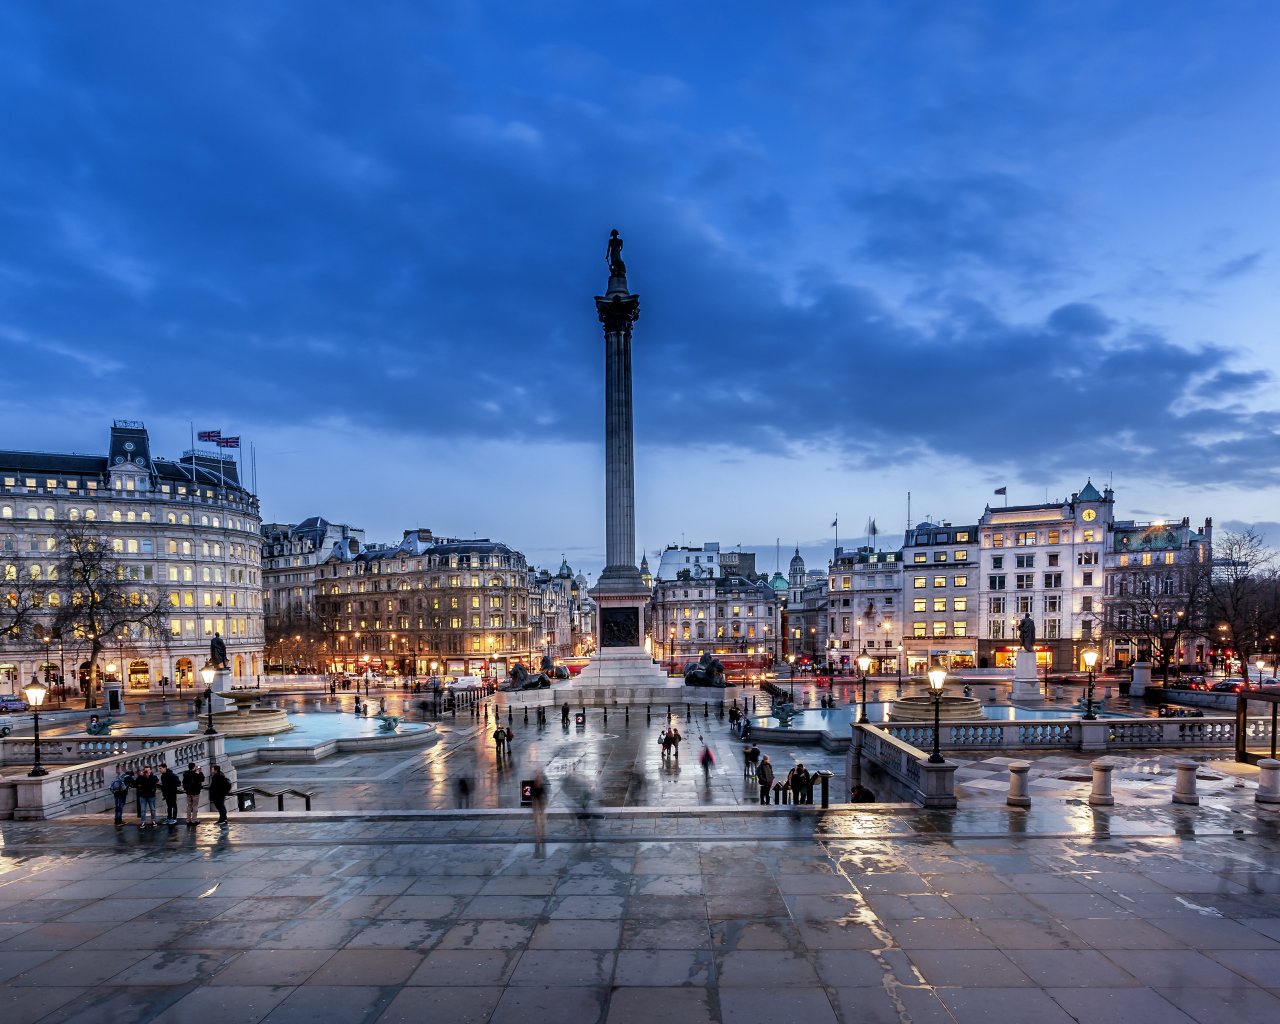 Monument at the evening city square, London. England